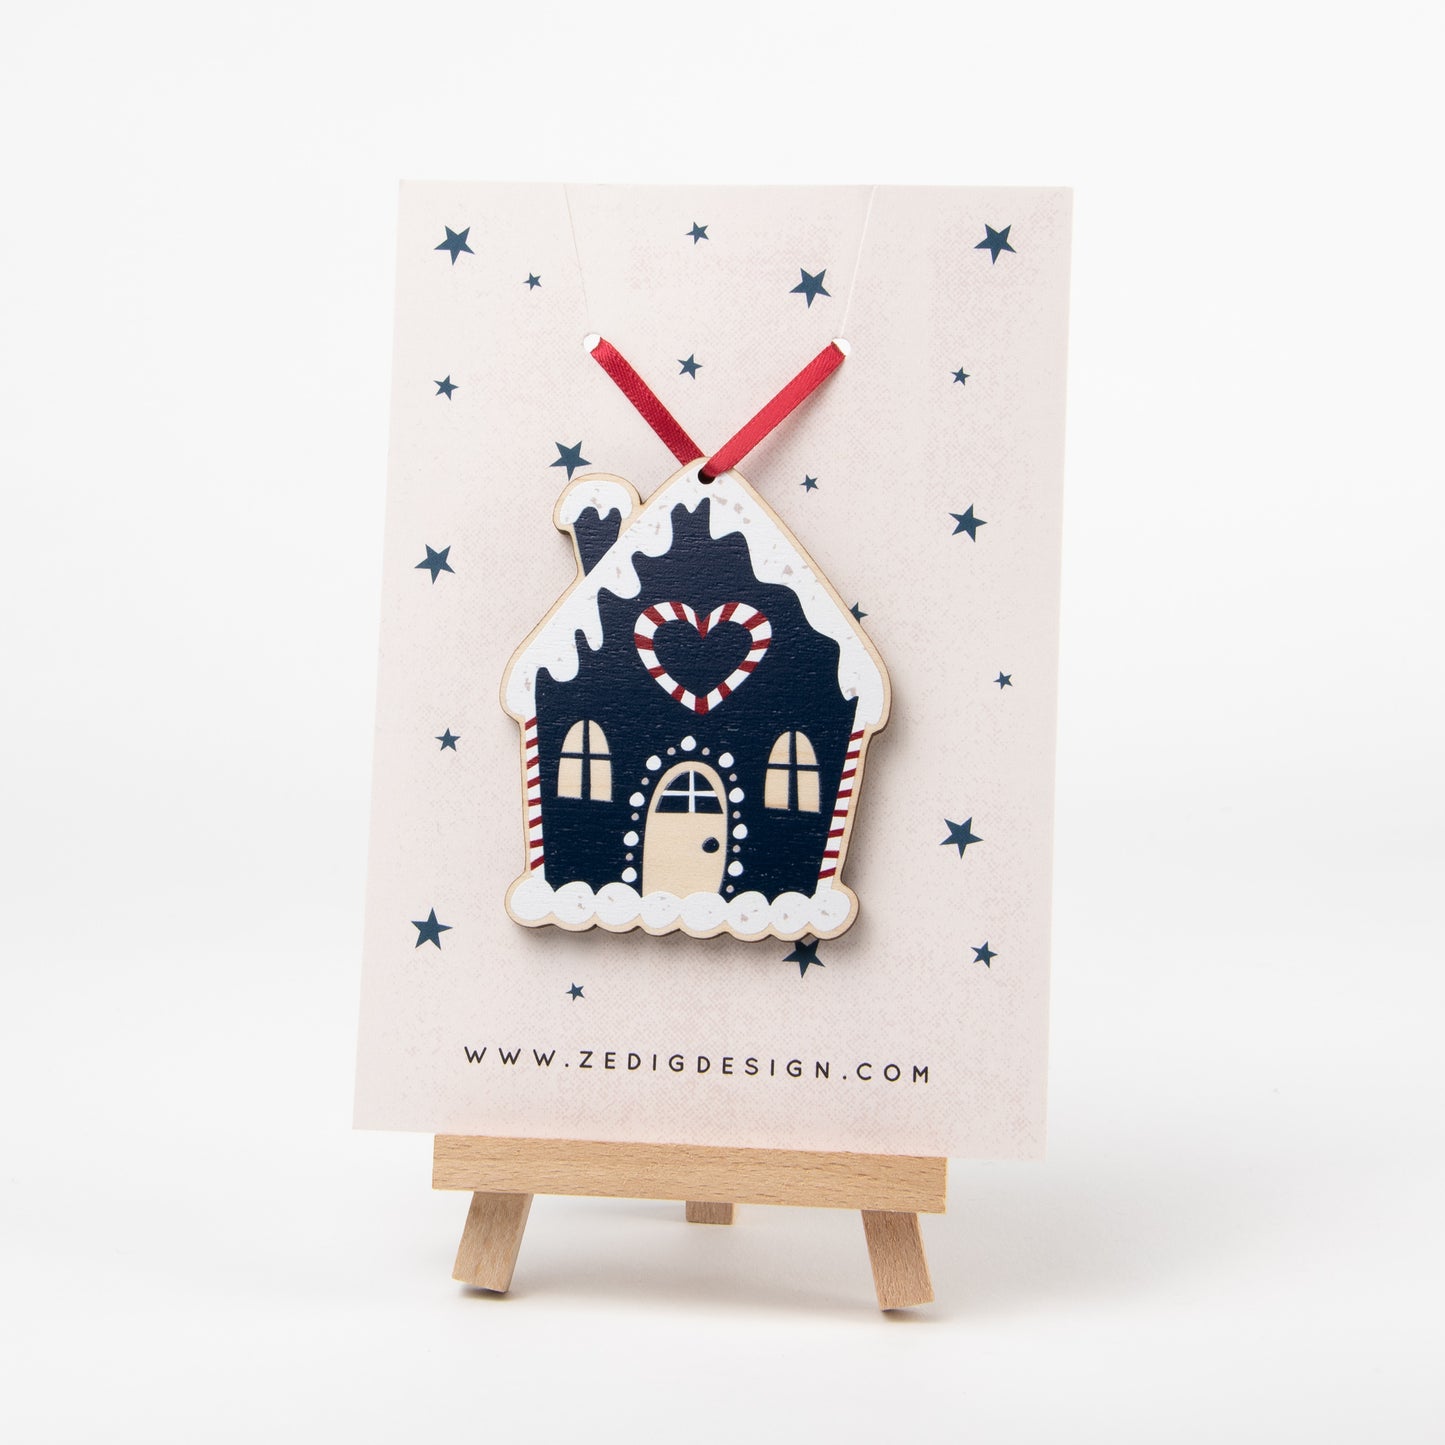 Gingerbread house wooden Christmas decoration